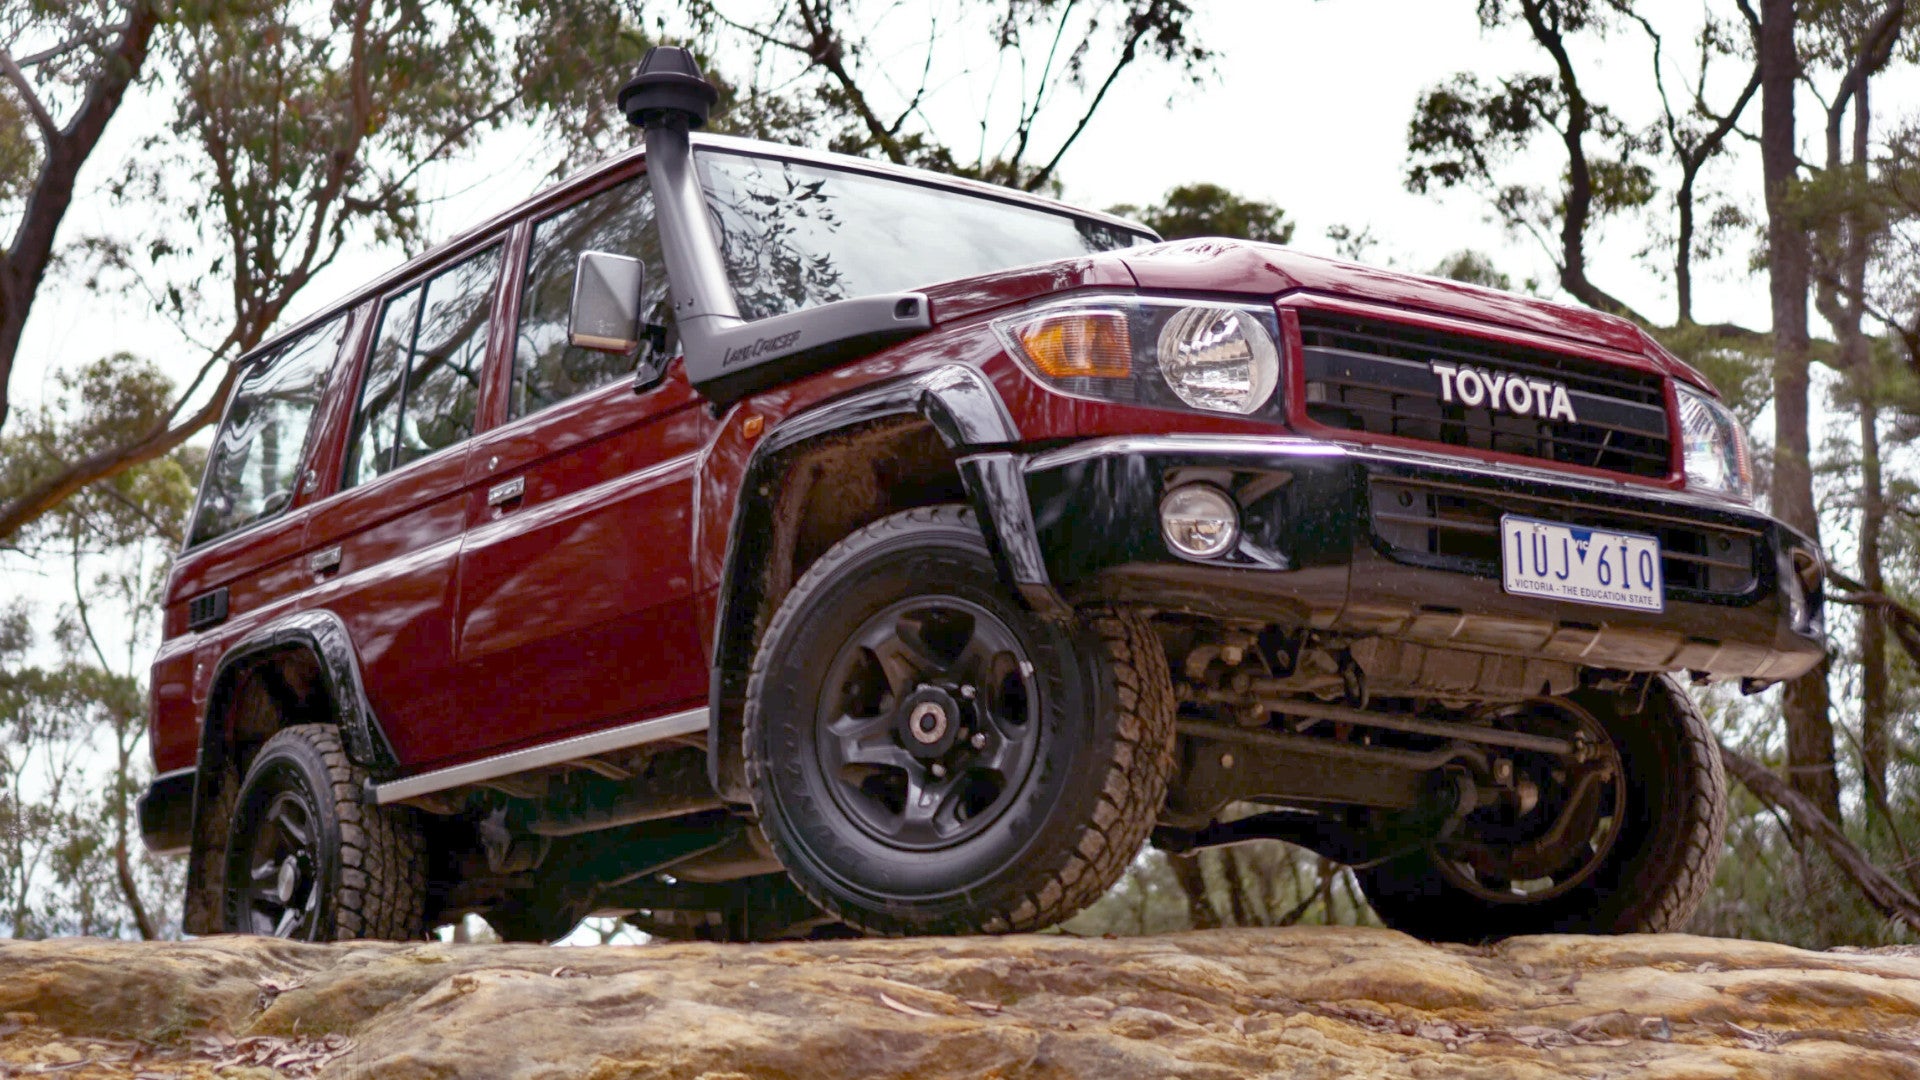 Ancient Toyota Land Cruiser 70 Series Will Live To See 40th Year in Production